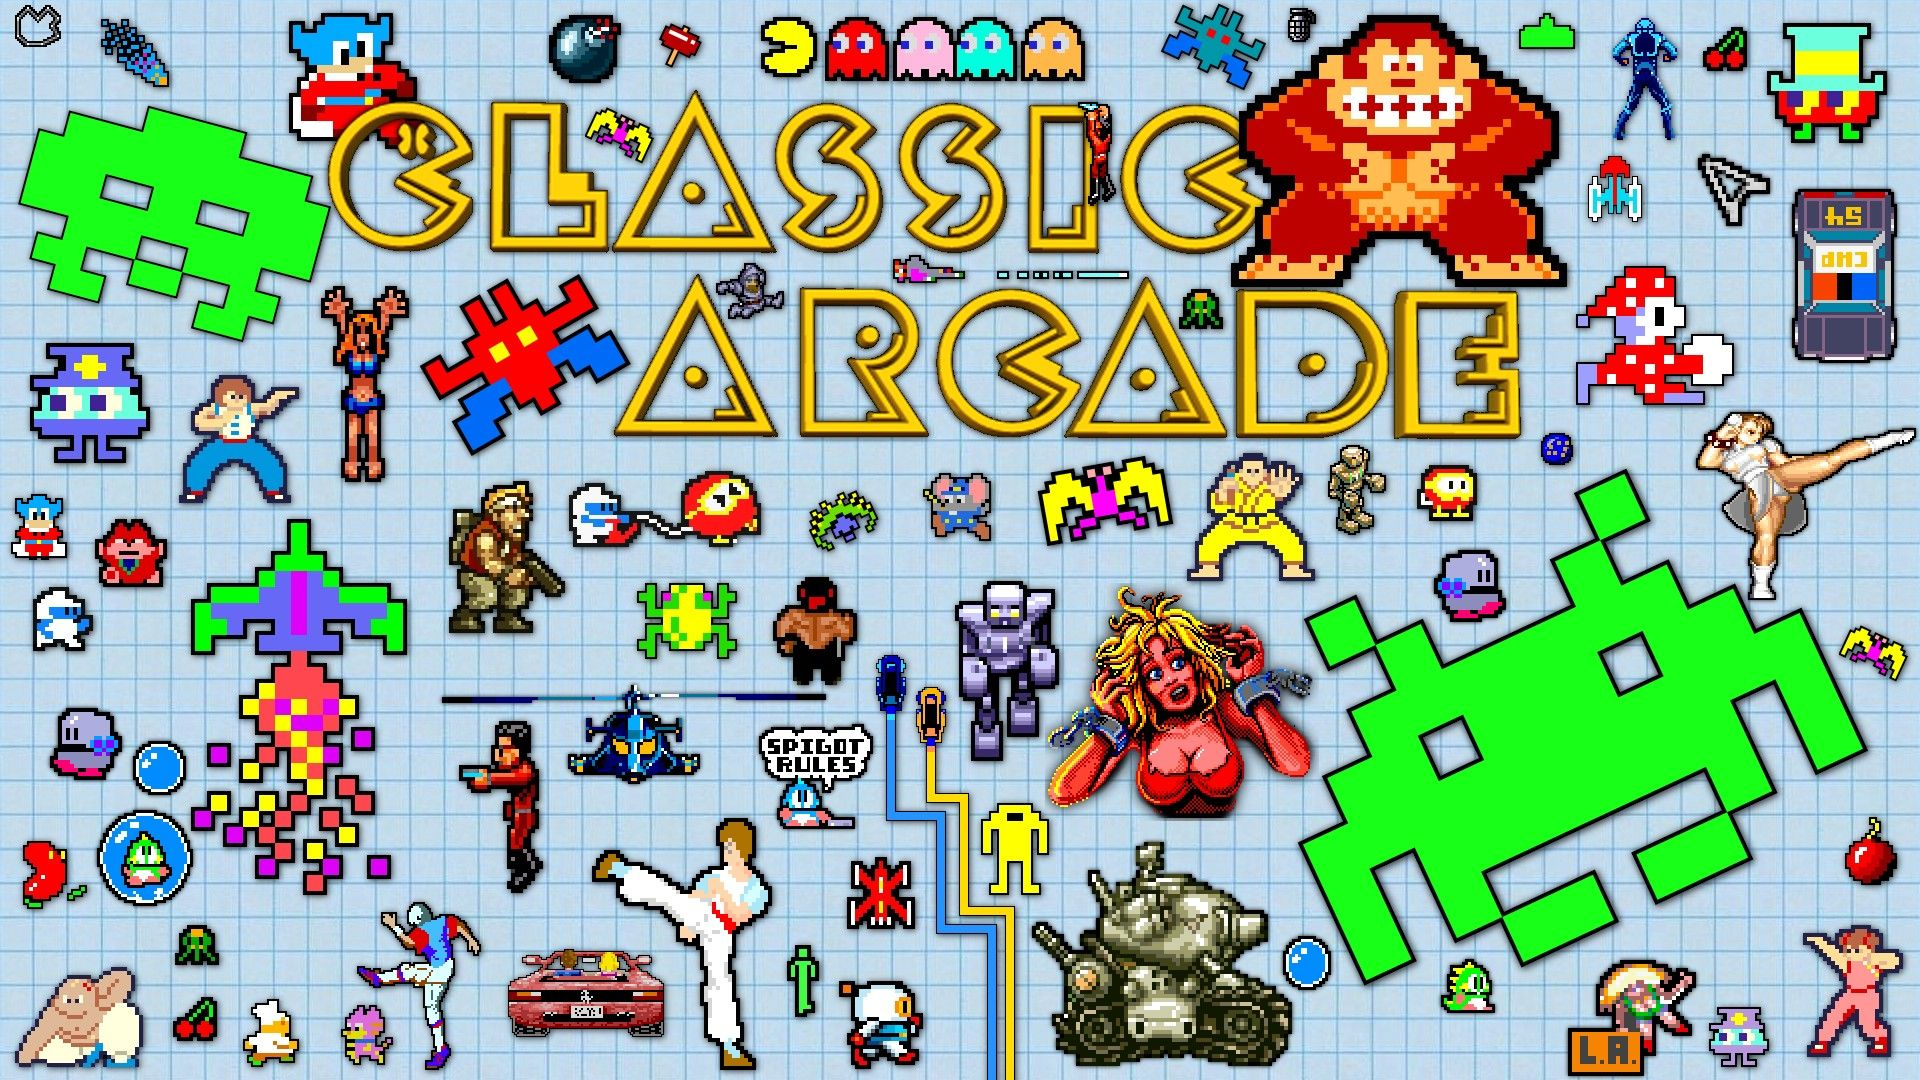 1920x1080 Arcade Wallpaper | decided to 1080-fie my arcade classic wallpaper hope you like it ... | Classic video games, Retro arcade games, Retro video games